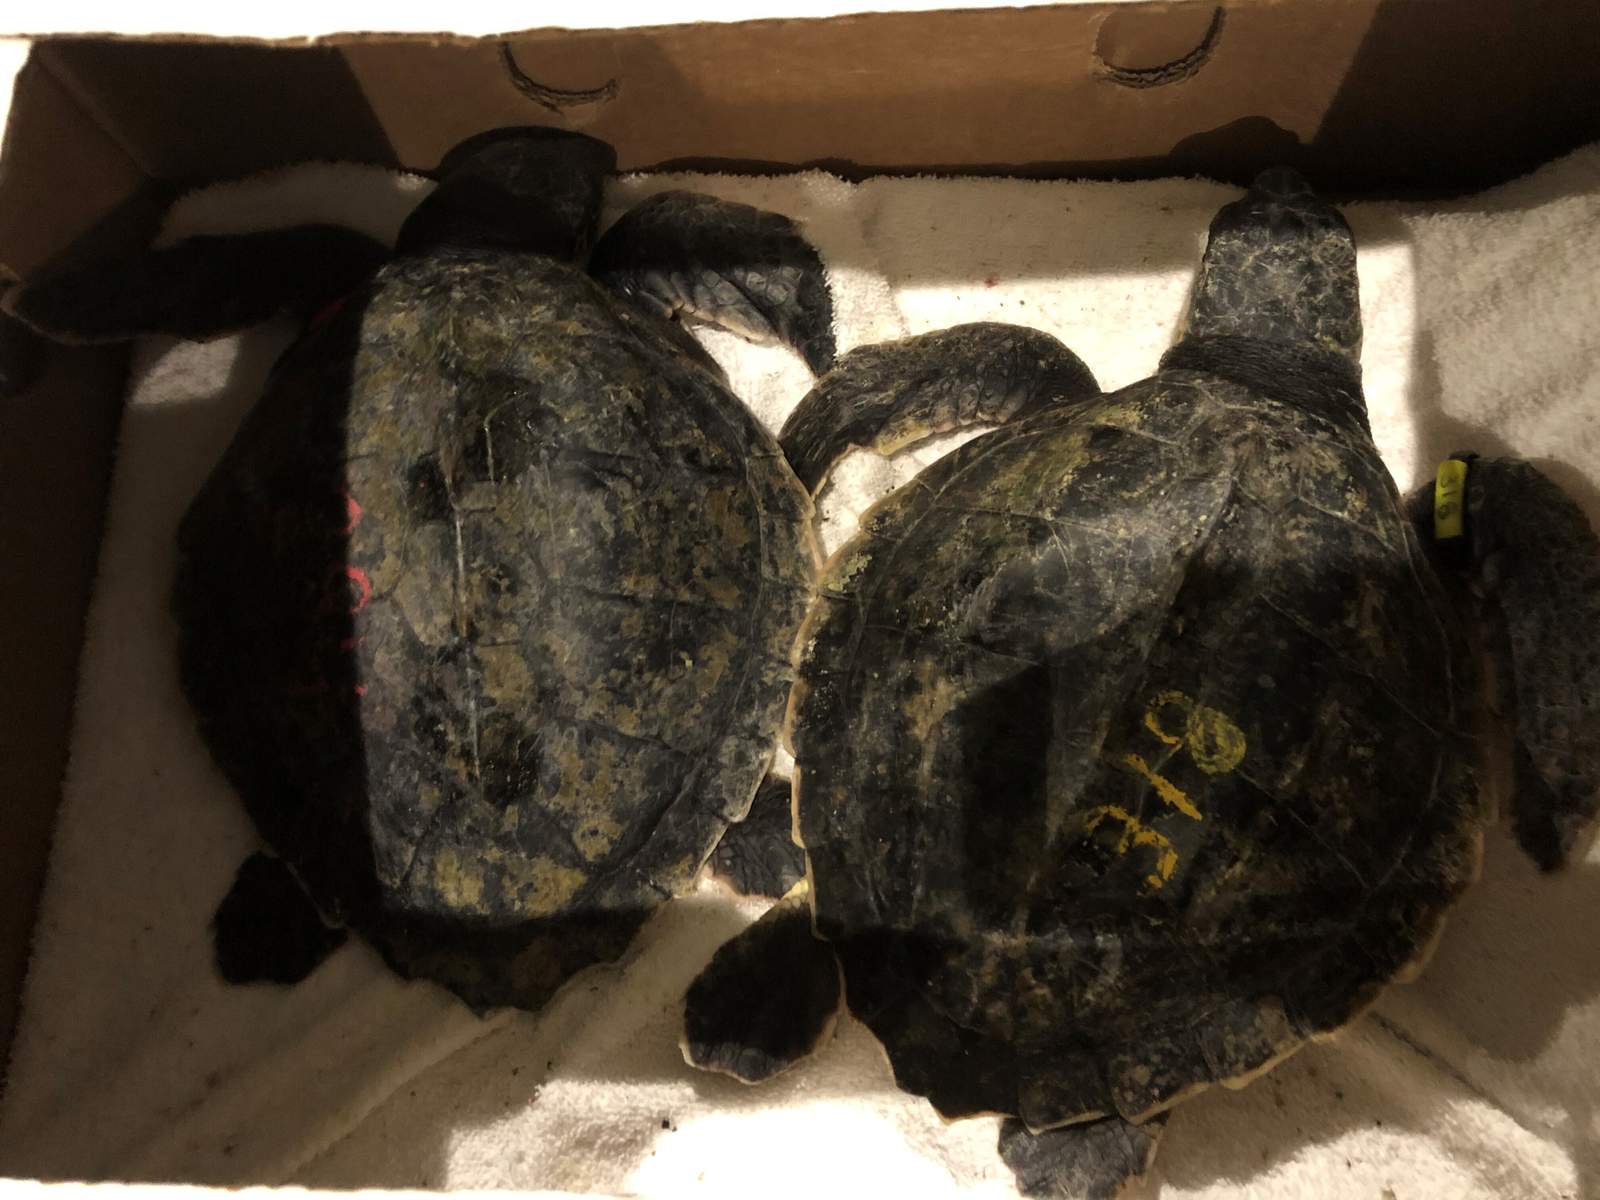 Rough rescue: Storms, broken plane force layover for turtles